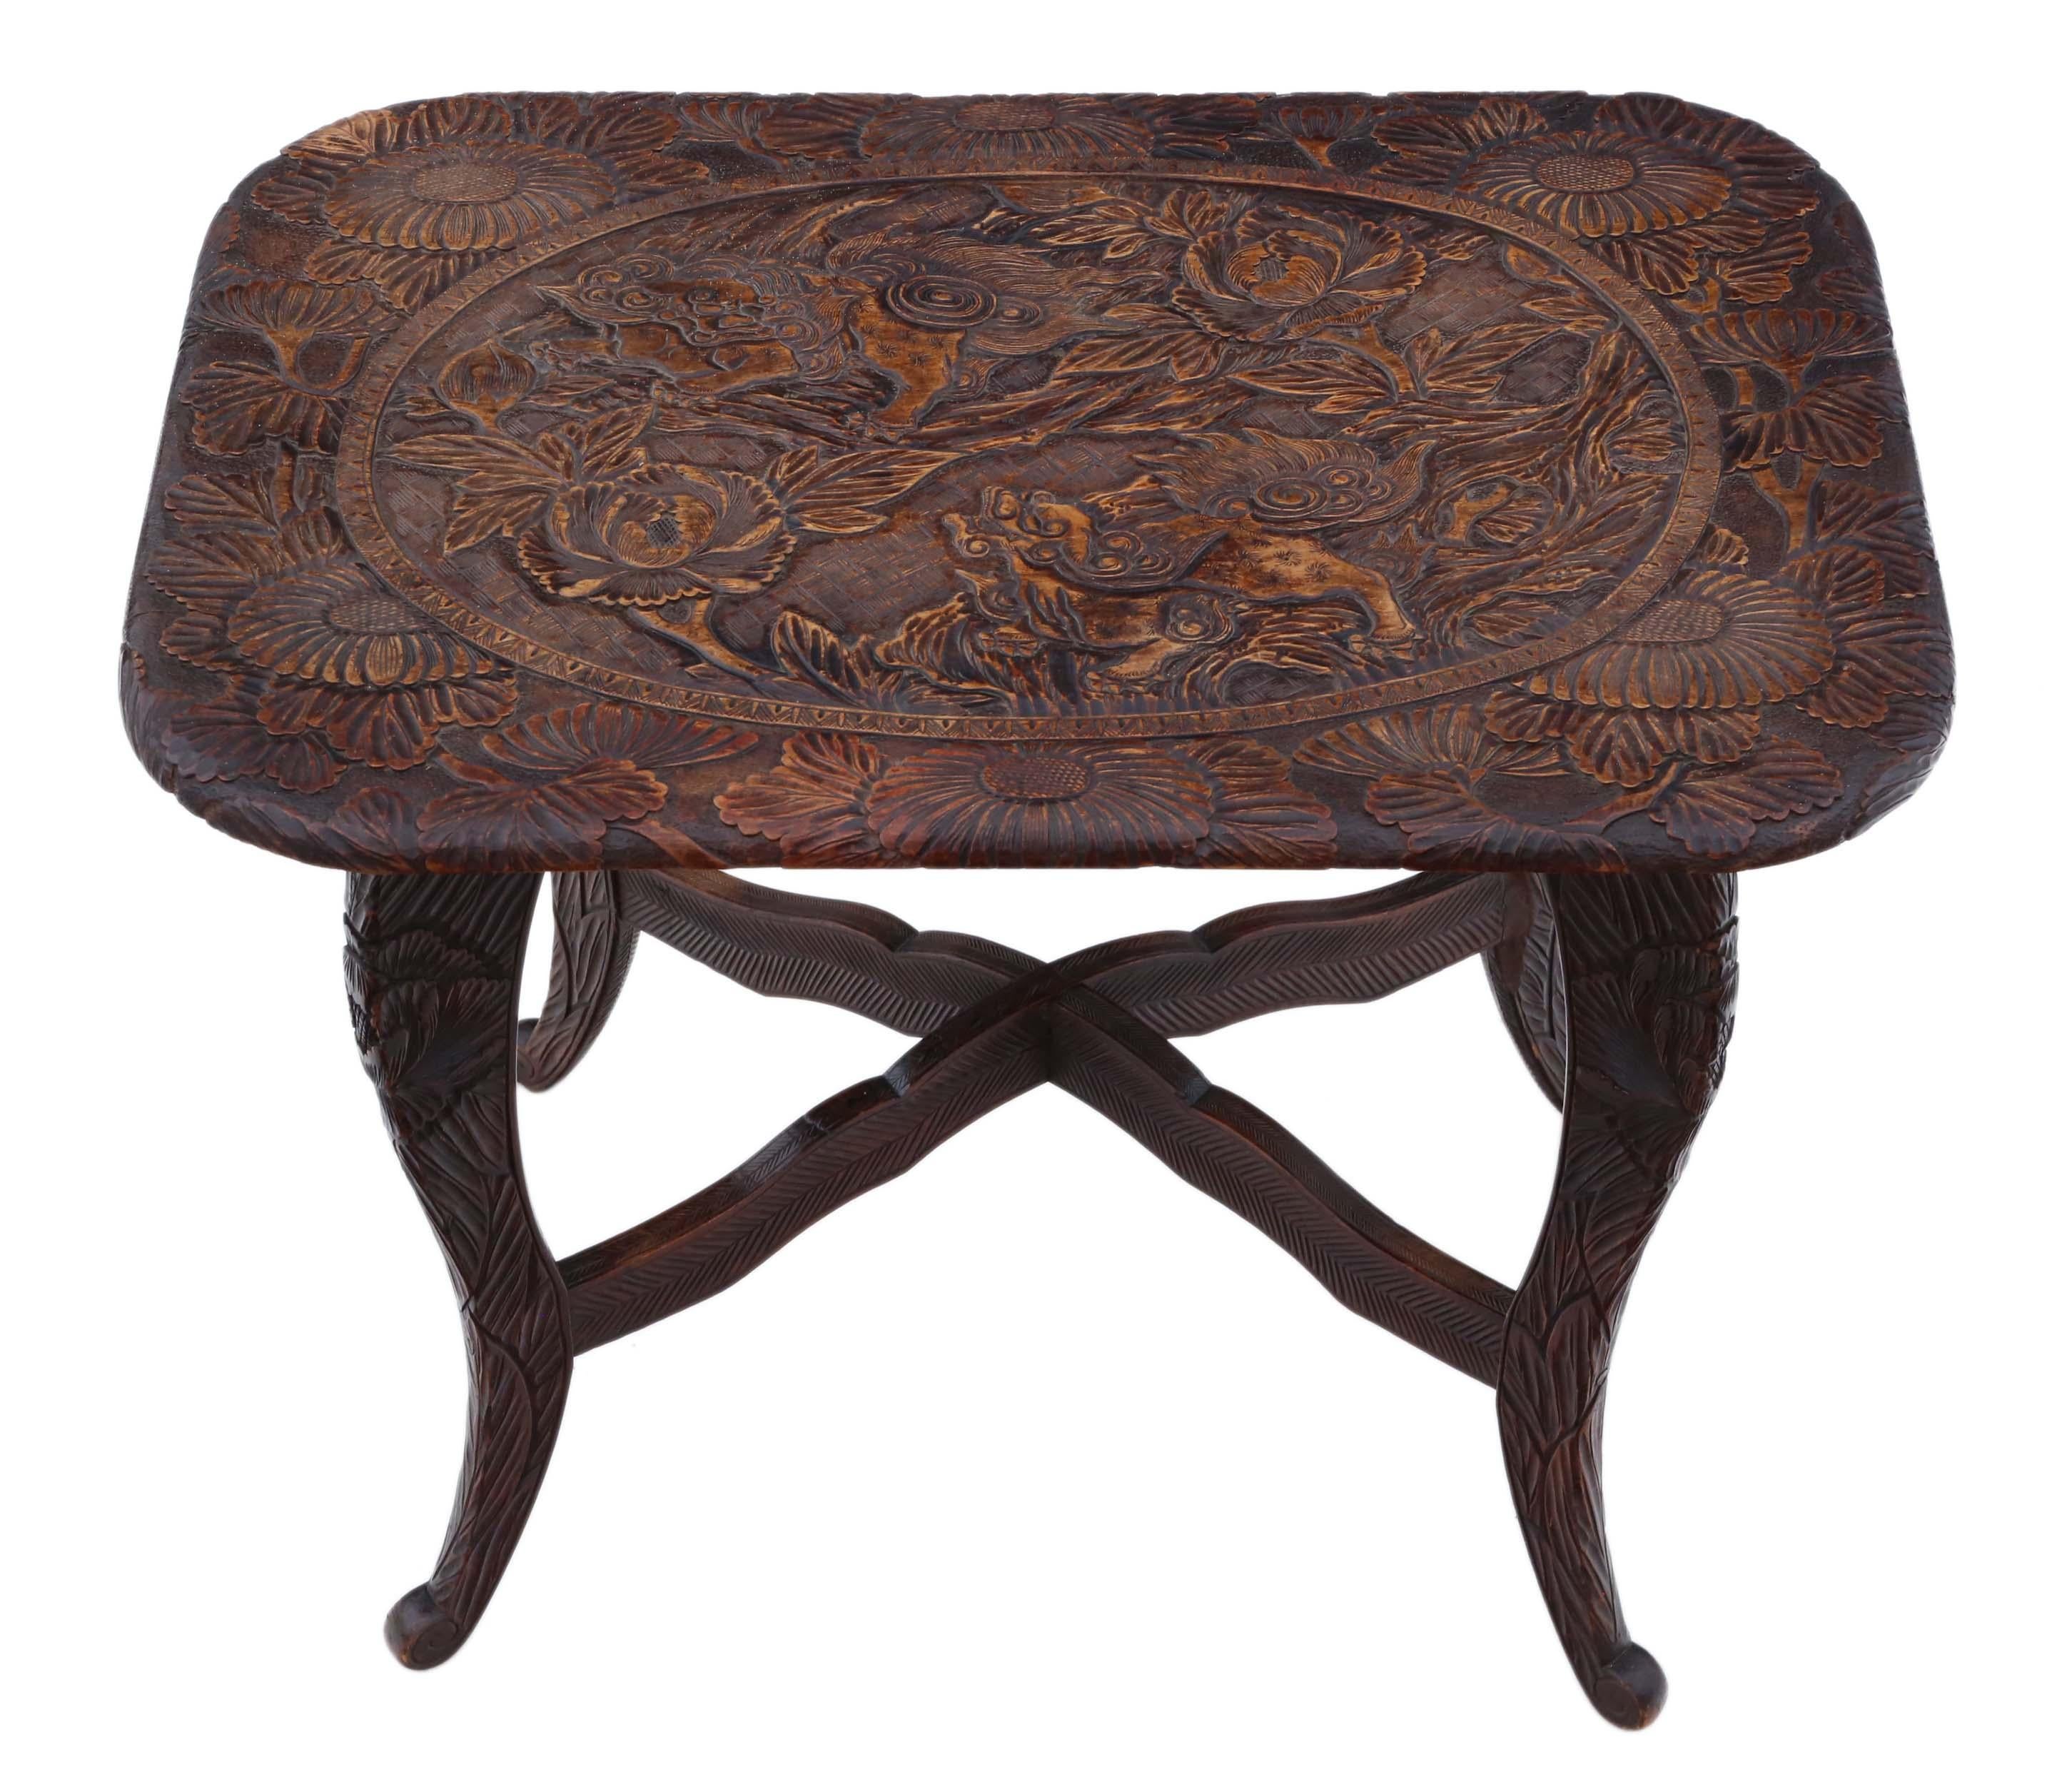 Antique fine quality carved Chinoiserie hardwood writing side or occasional table. Believed to have originally come from Liberty C1900. Decorated with Foo dogs, trees and plants.

No loose joints and no woodworm. Full of age, character and charm.